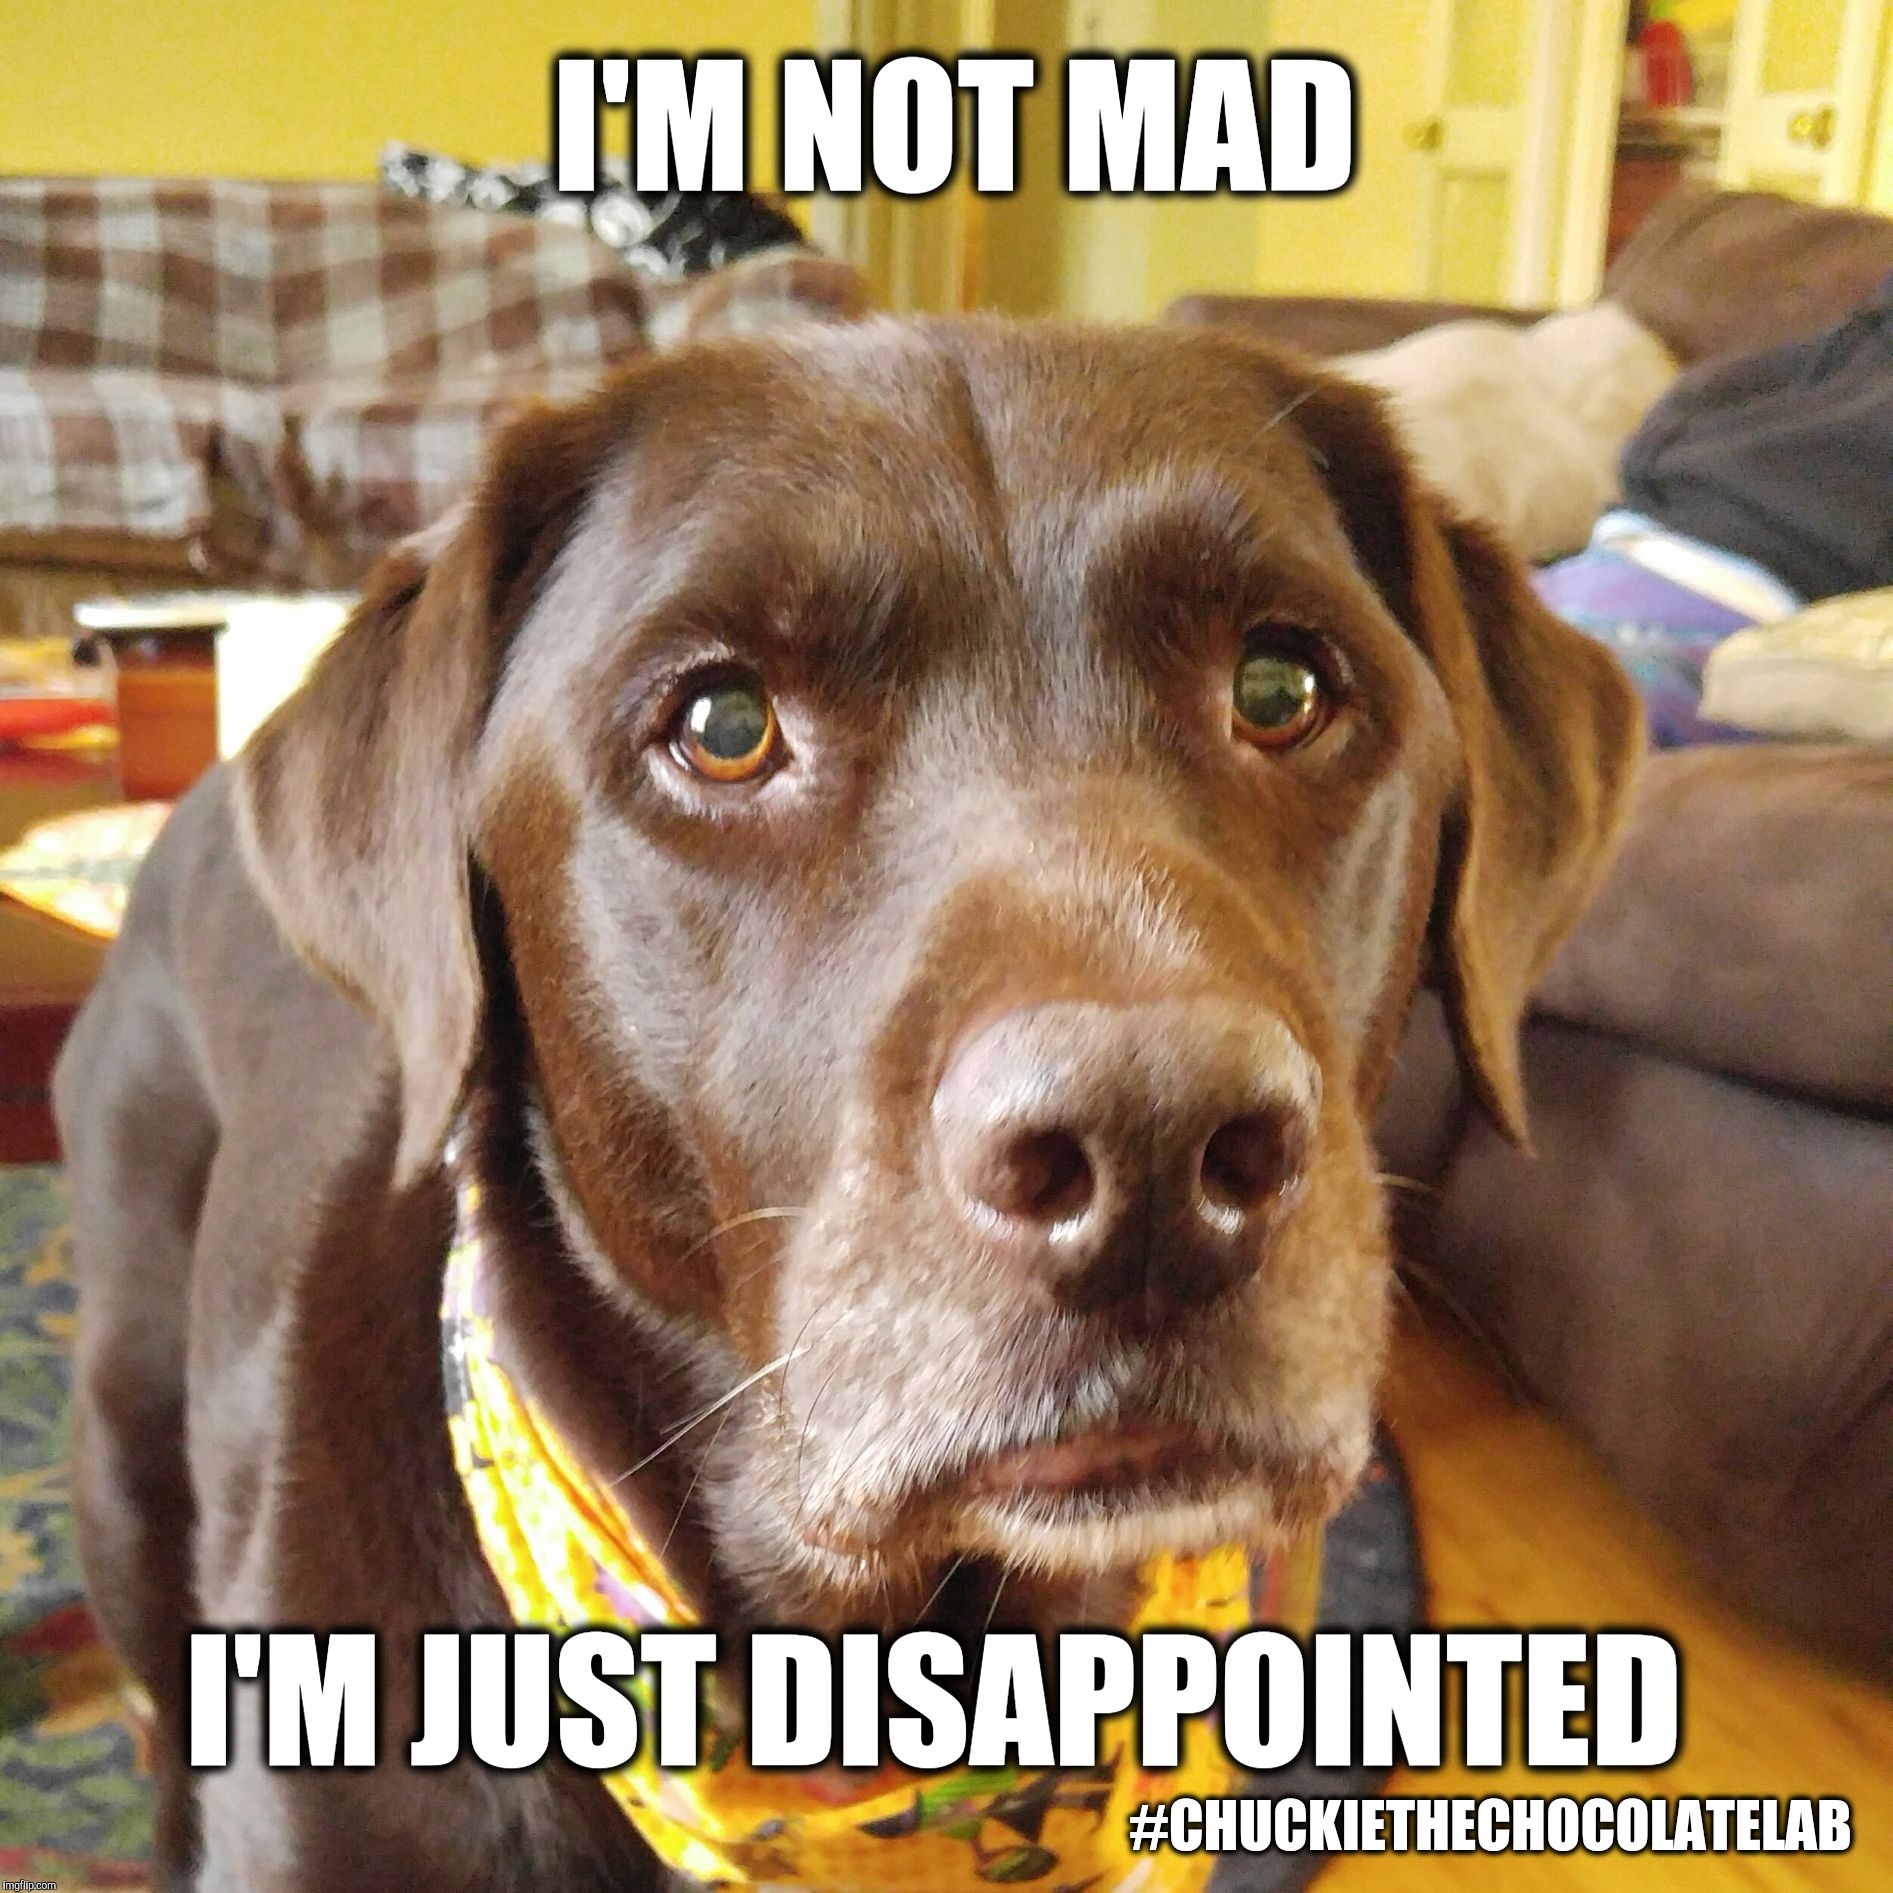 I'm not mad in just disappointed  | I'M NOT MAD; I'M JUST DISAPPOINTED; #CHUCKIETHECHOCOLATELAB | image tagged in chuckie the chocolate lab,disappointed,i'm not mad,funny,dogs,memes,FreeKarma4U | made w/ Imgflip meme maker